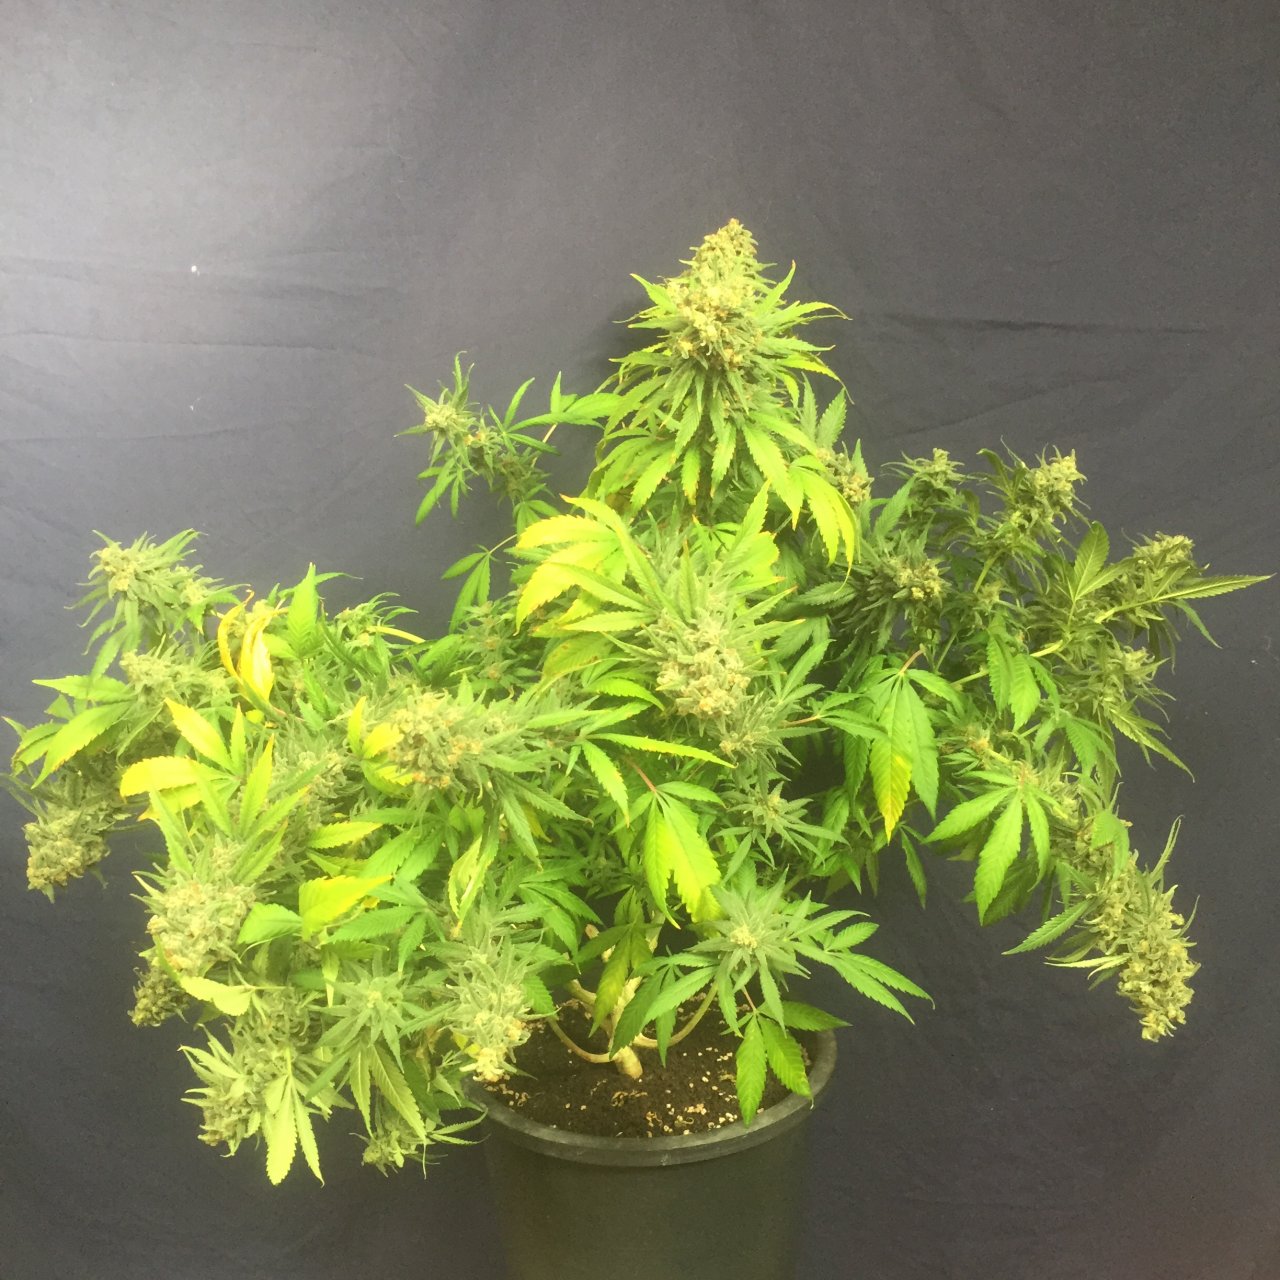 GSC #4, day 68